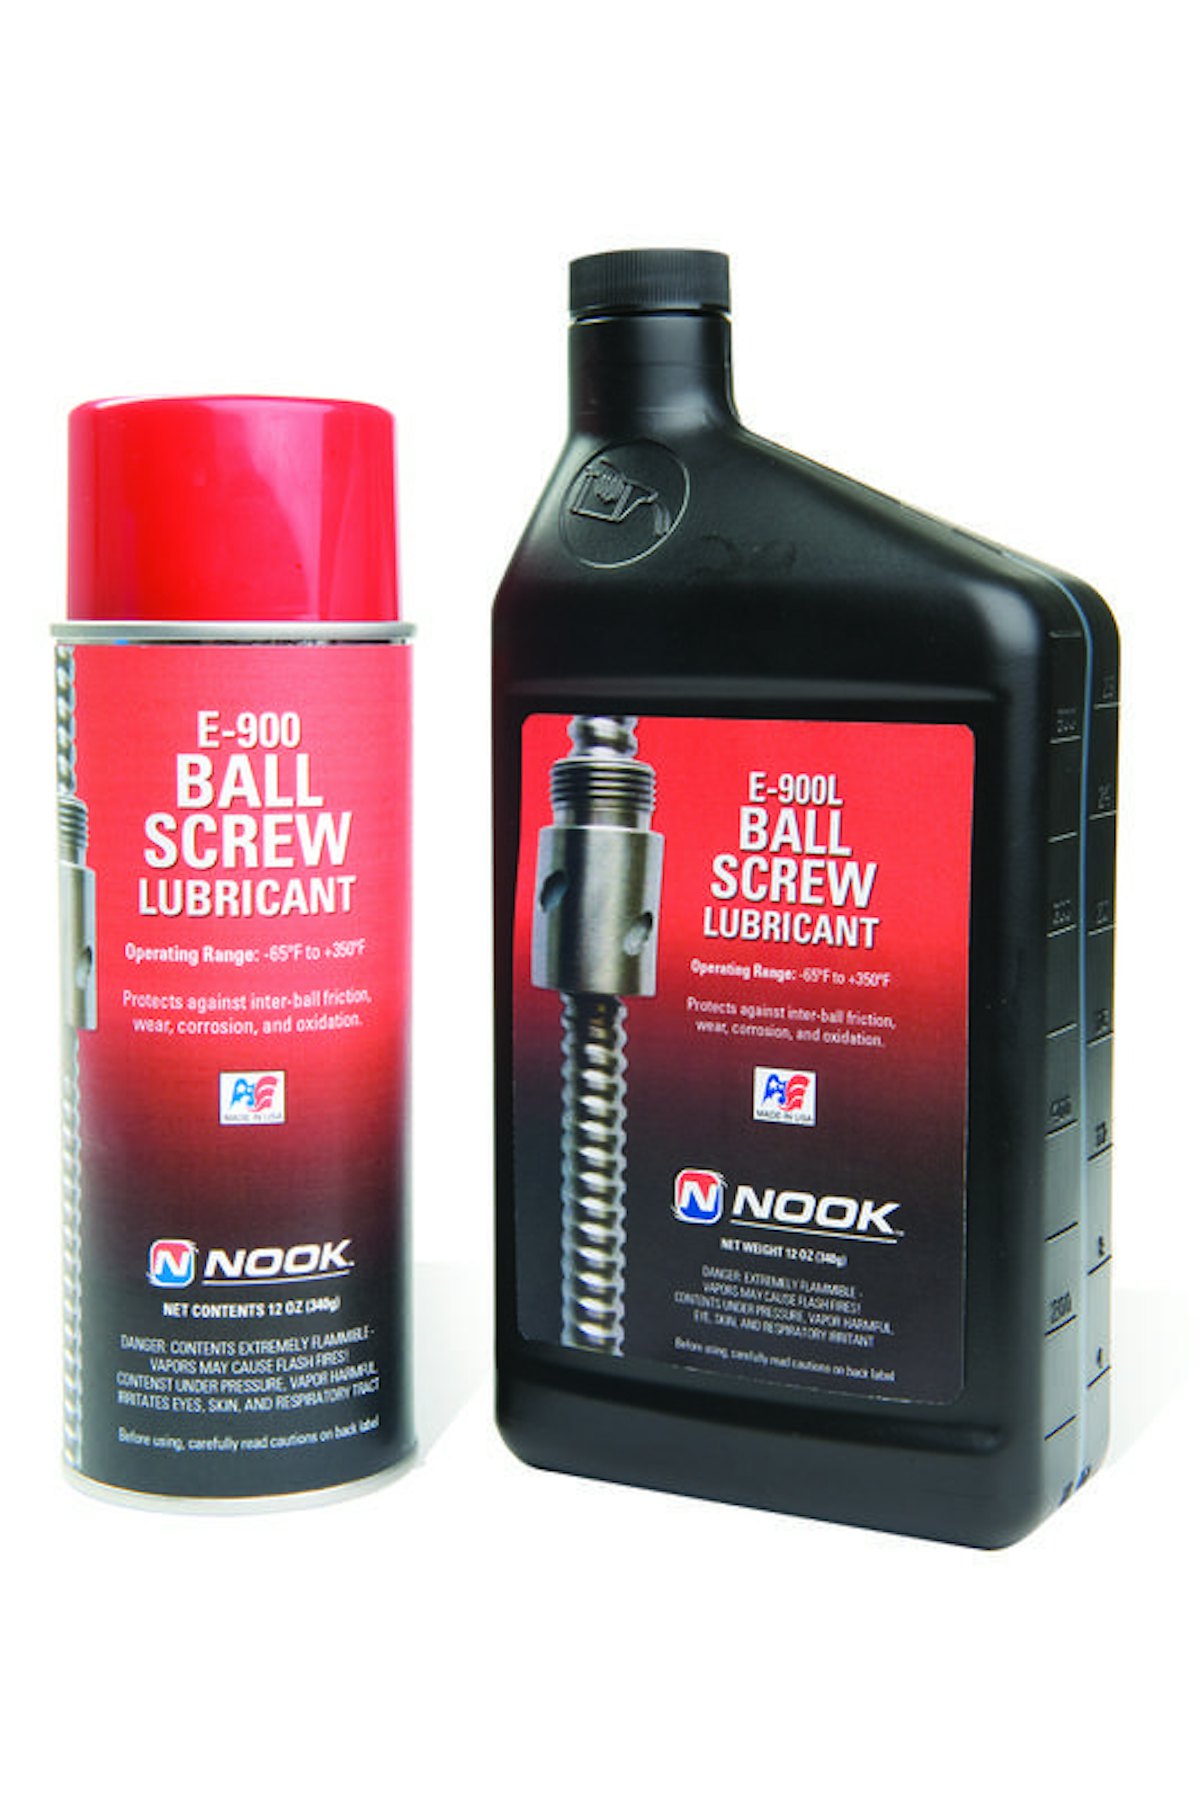 E-900 Ball Screw Lubricant From Nook Industries